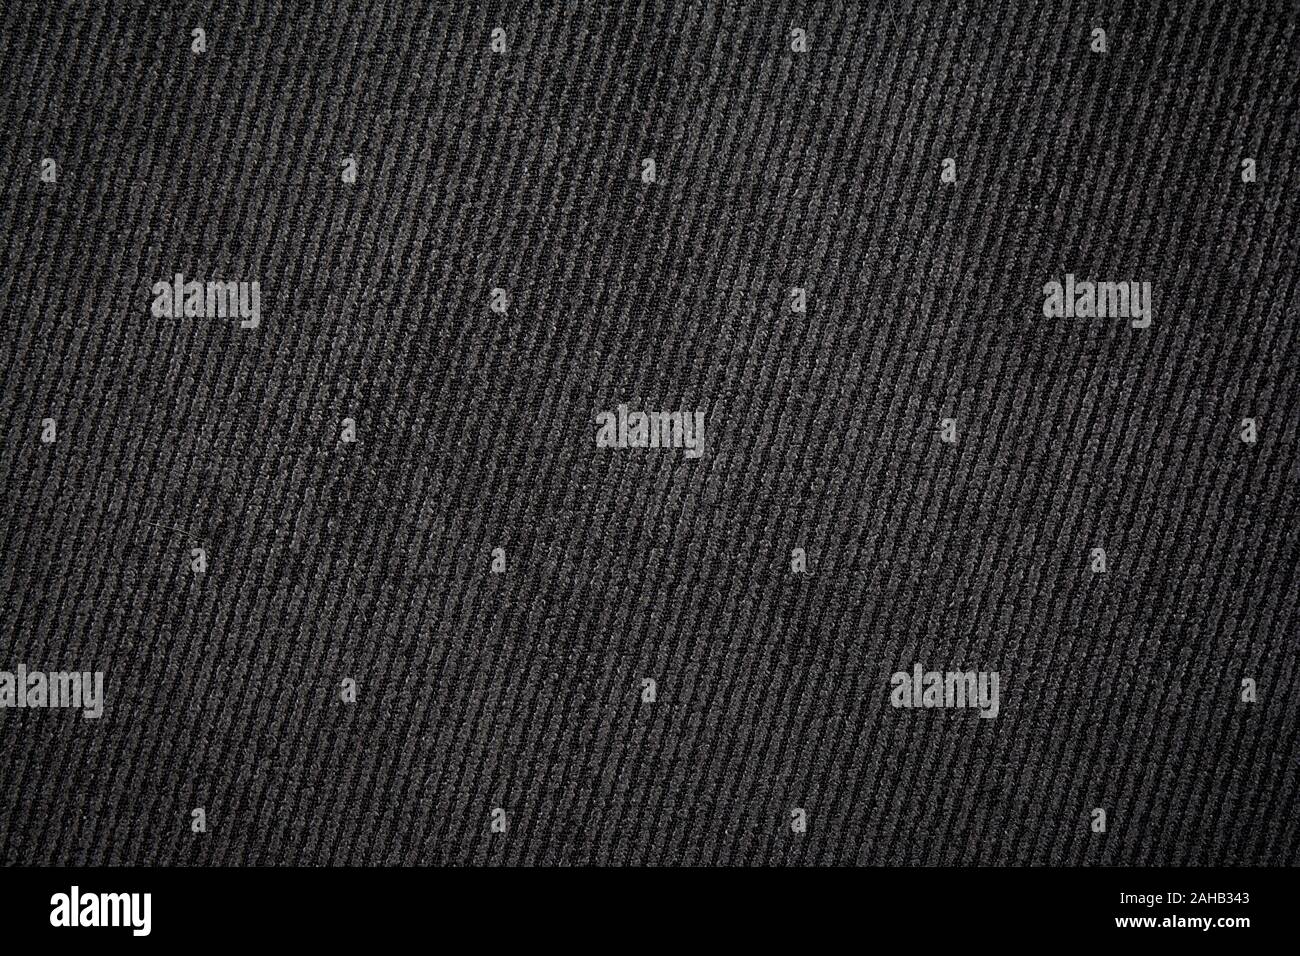 Here is a dark gray fabric texture with lines working in a diagonal ...